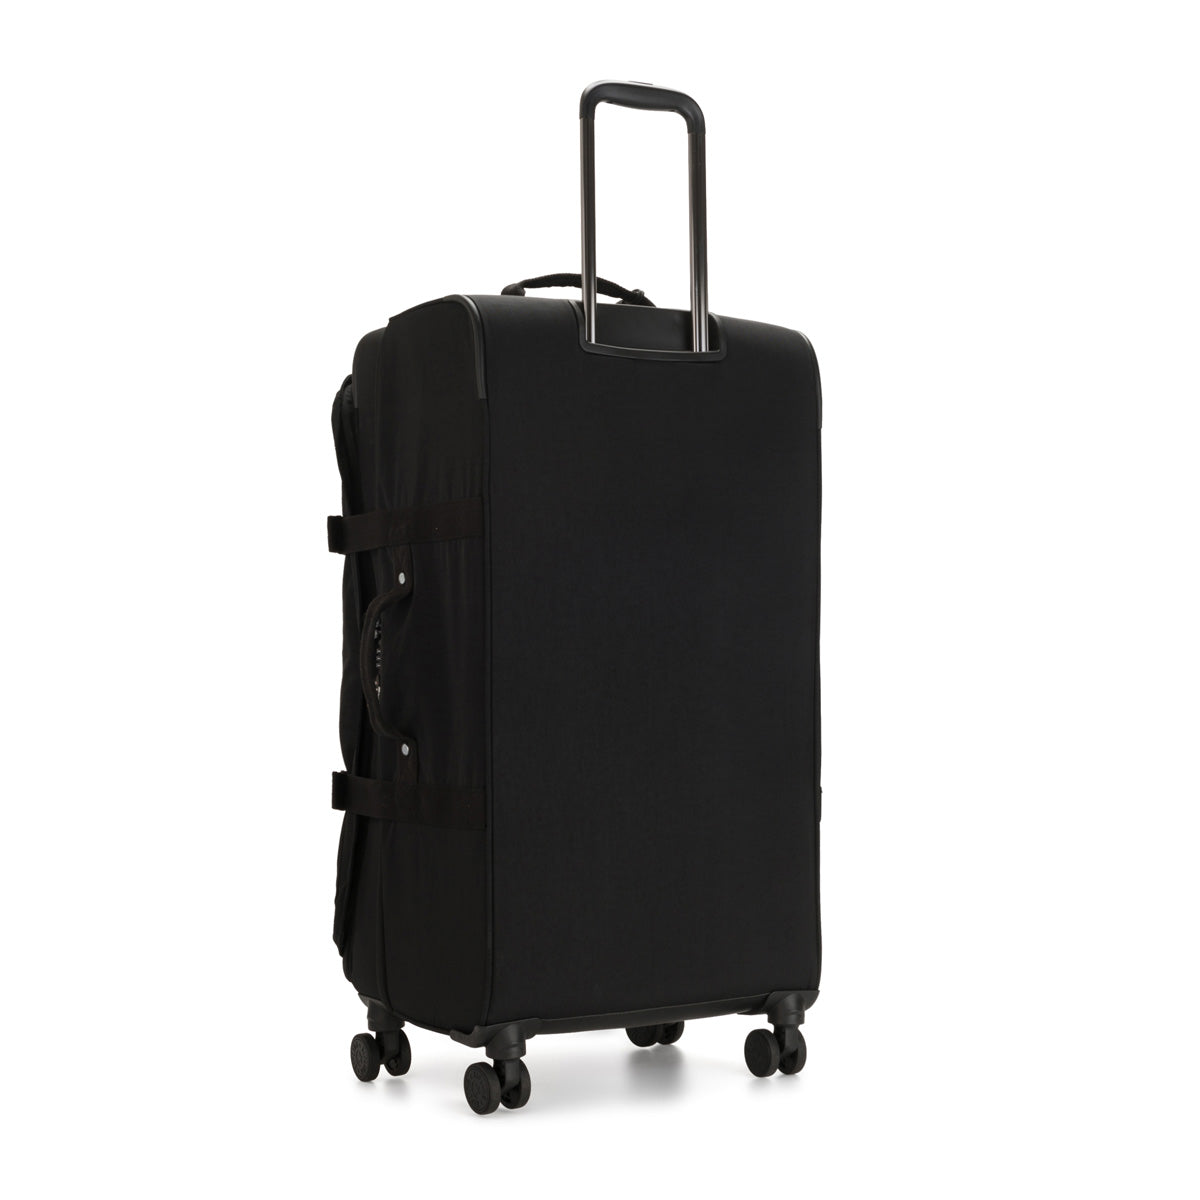  Eastpak Tranverz - Suitcase with Wheels - Rolling Luggage for  Travel with TSA Lock, 2 Wheels, 2 Compartments, and Compression Straps - M,  Black